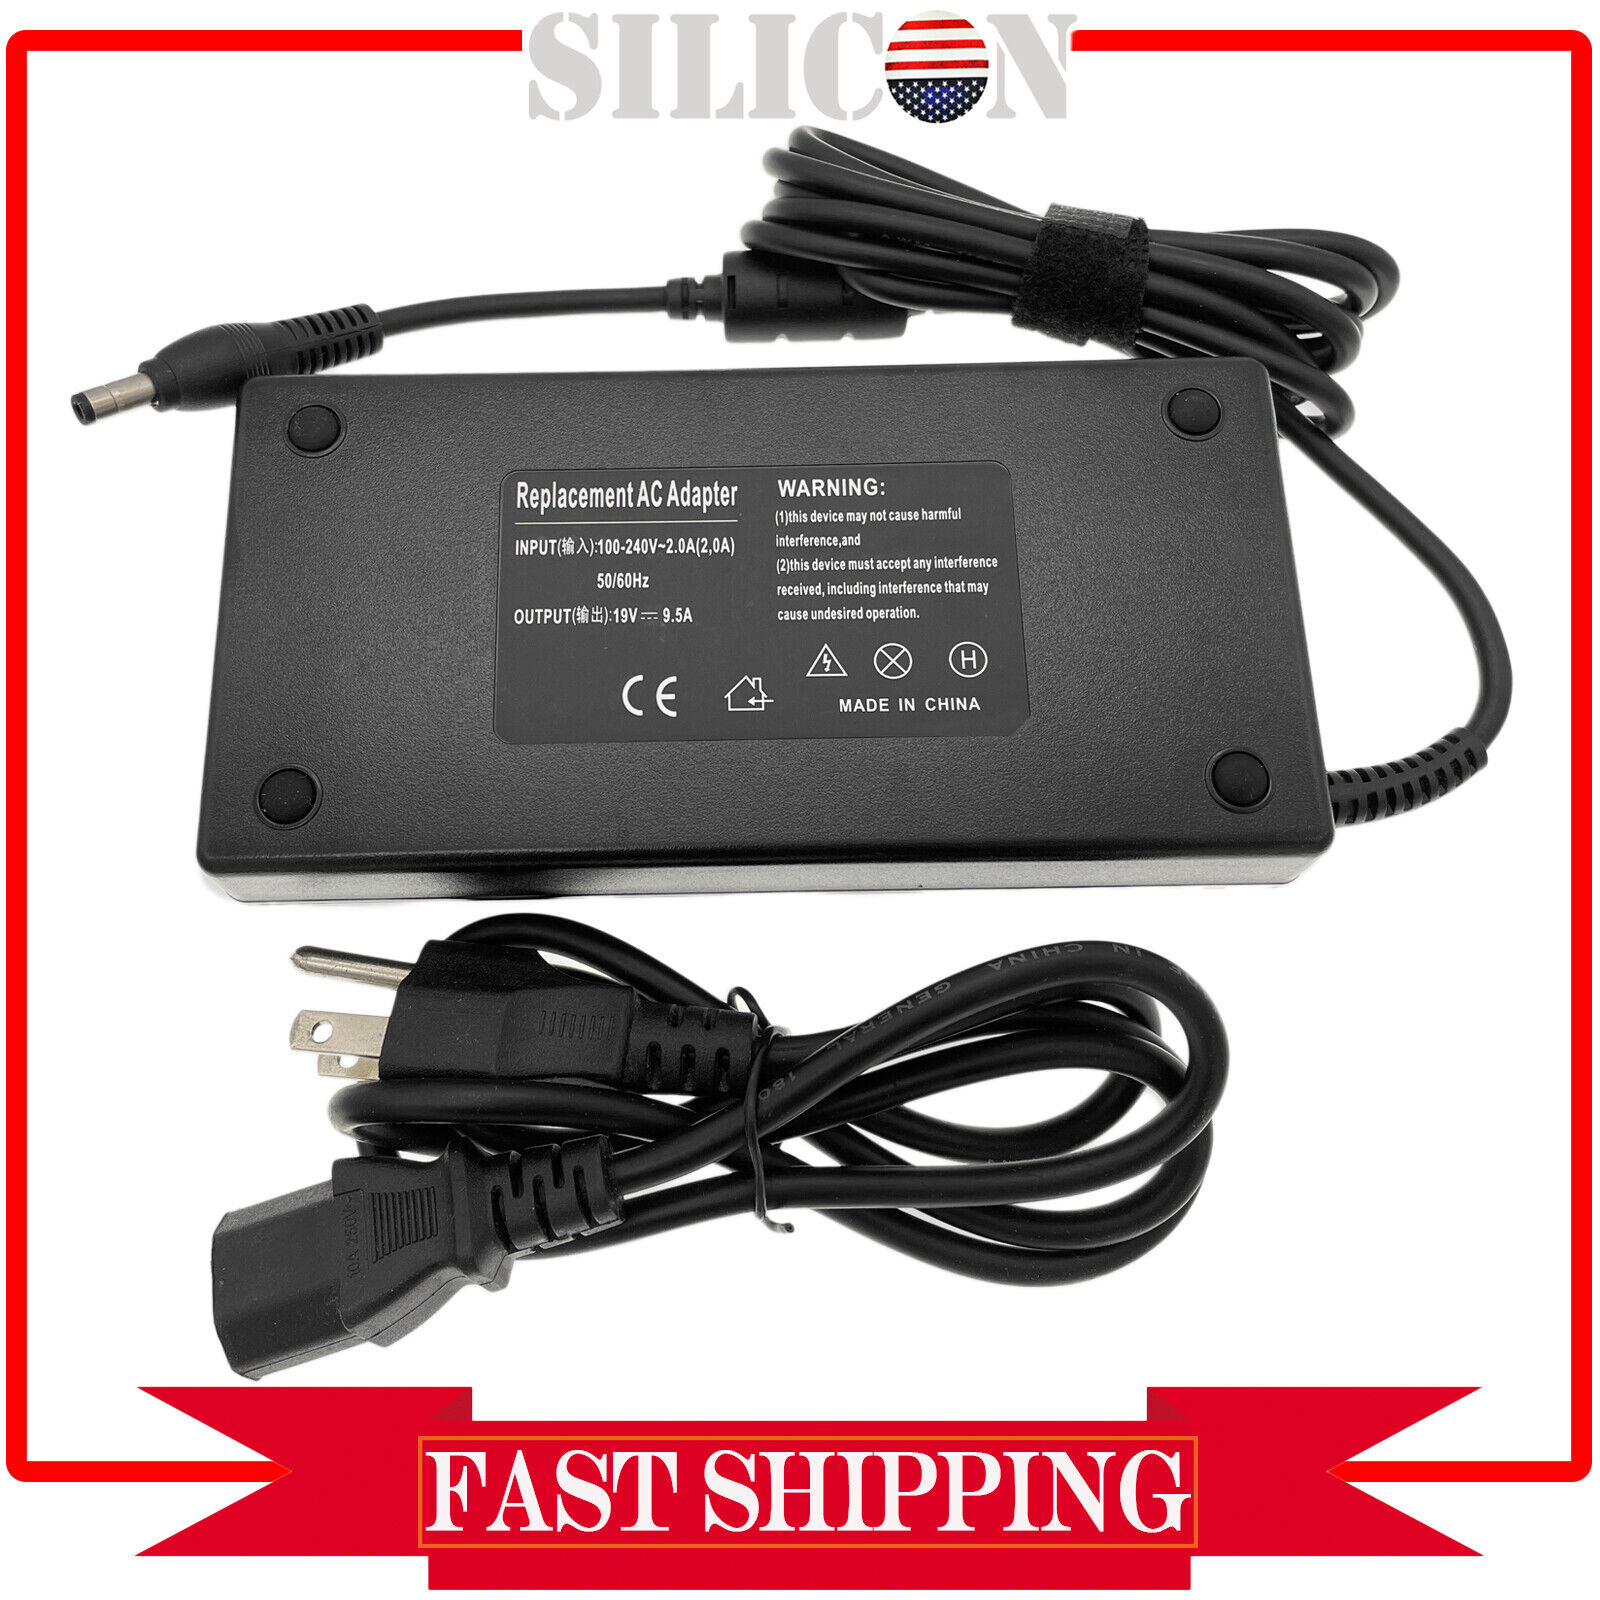 New 180W AC Adapter Charger Power For Asus ROG GL703GE gl703vd-wb71 gl703vd-db74